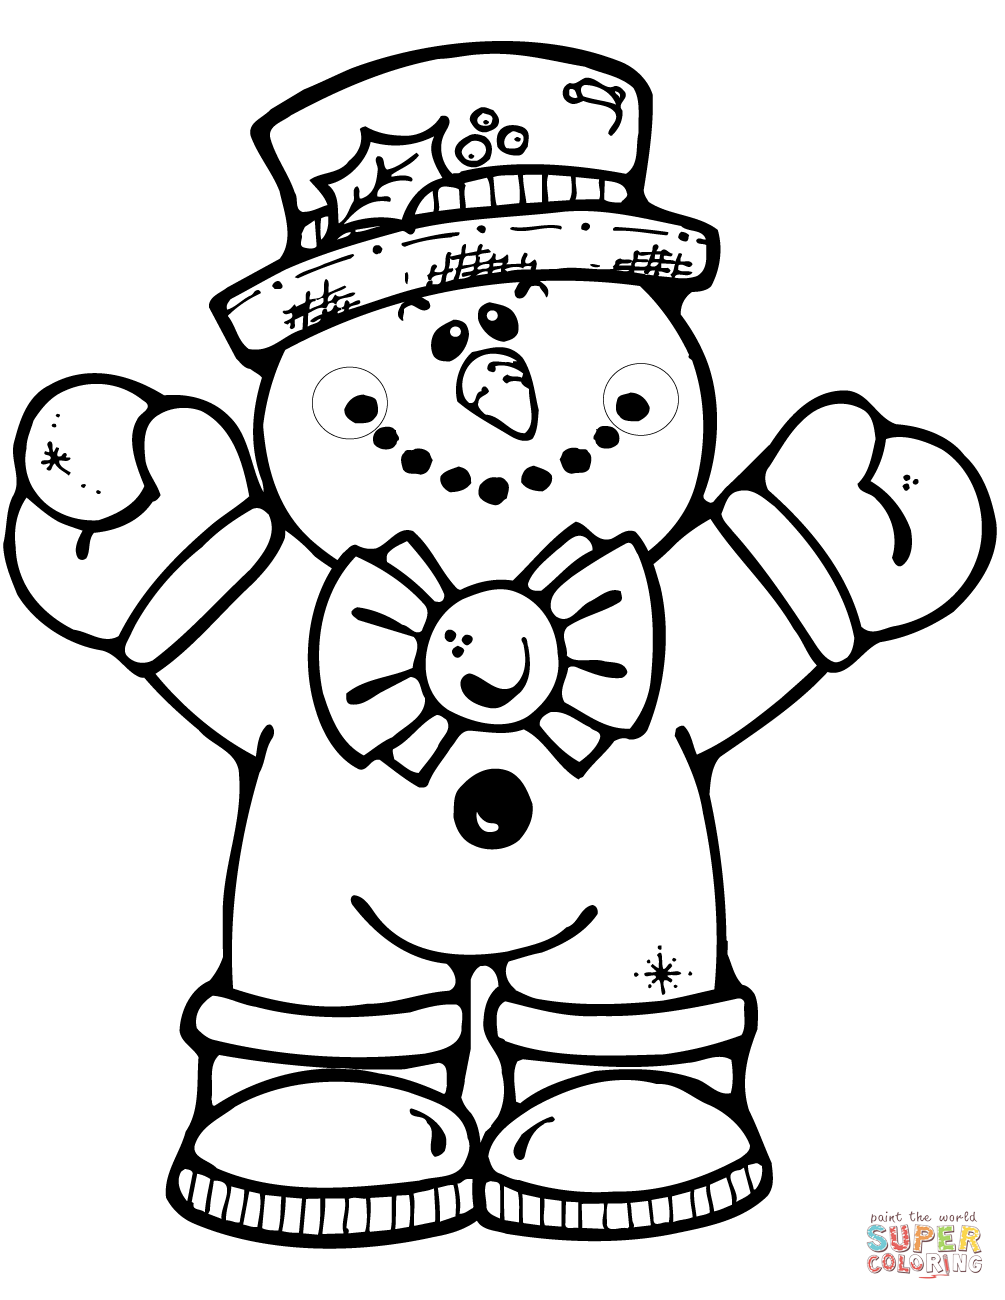 Hugging snowman coloring page free printable coloring pages